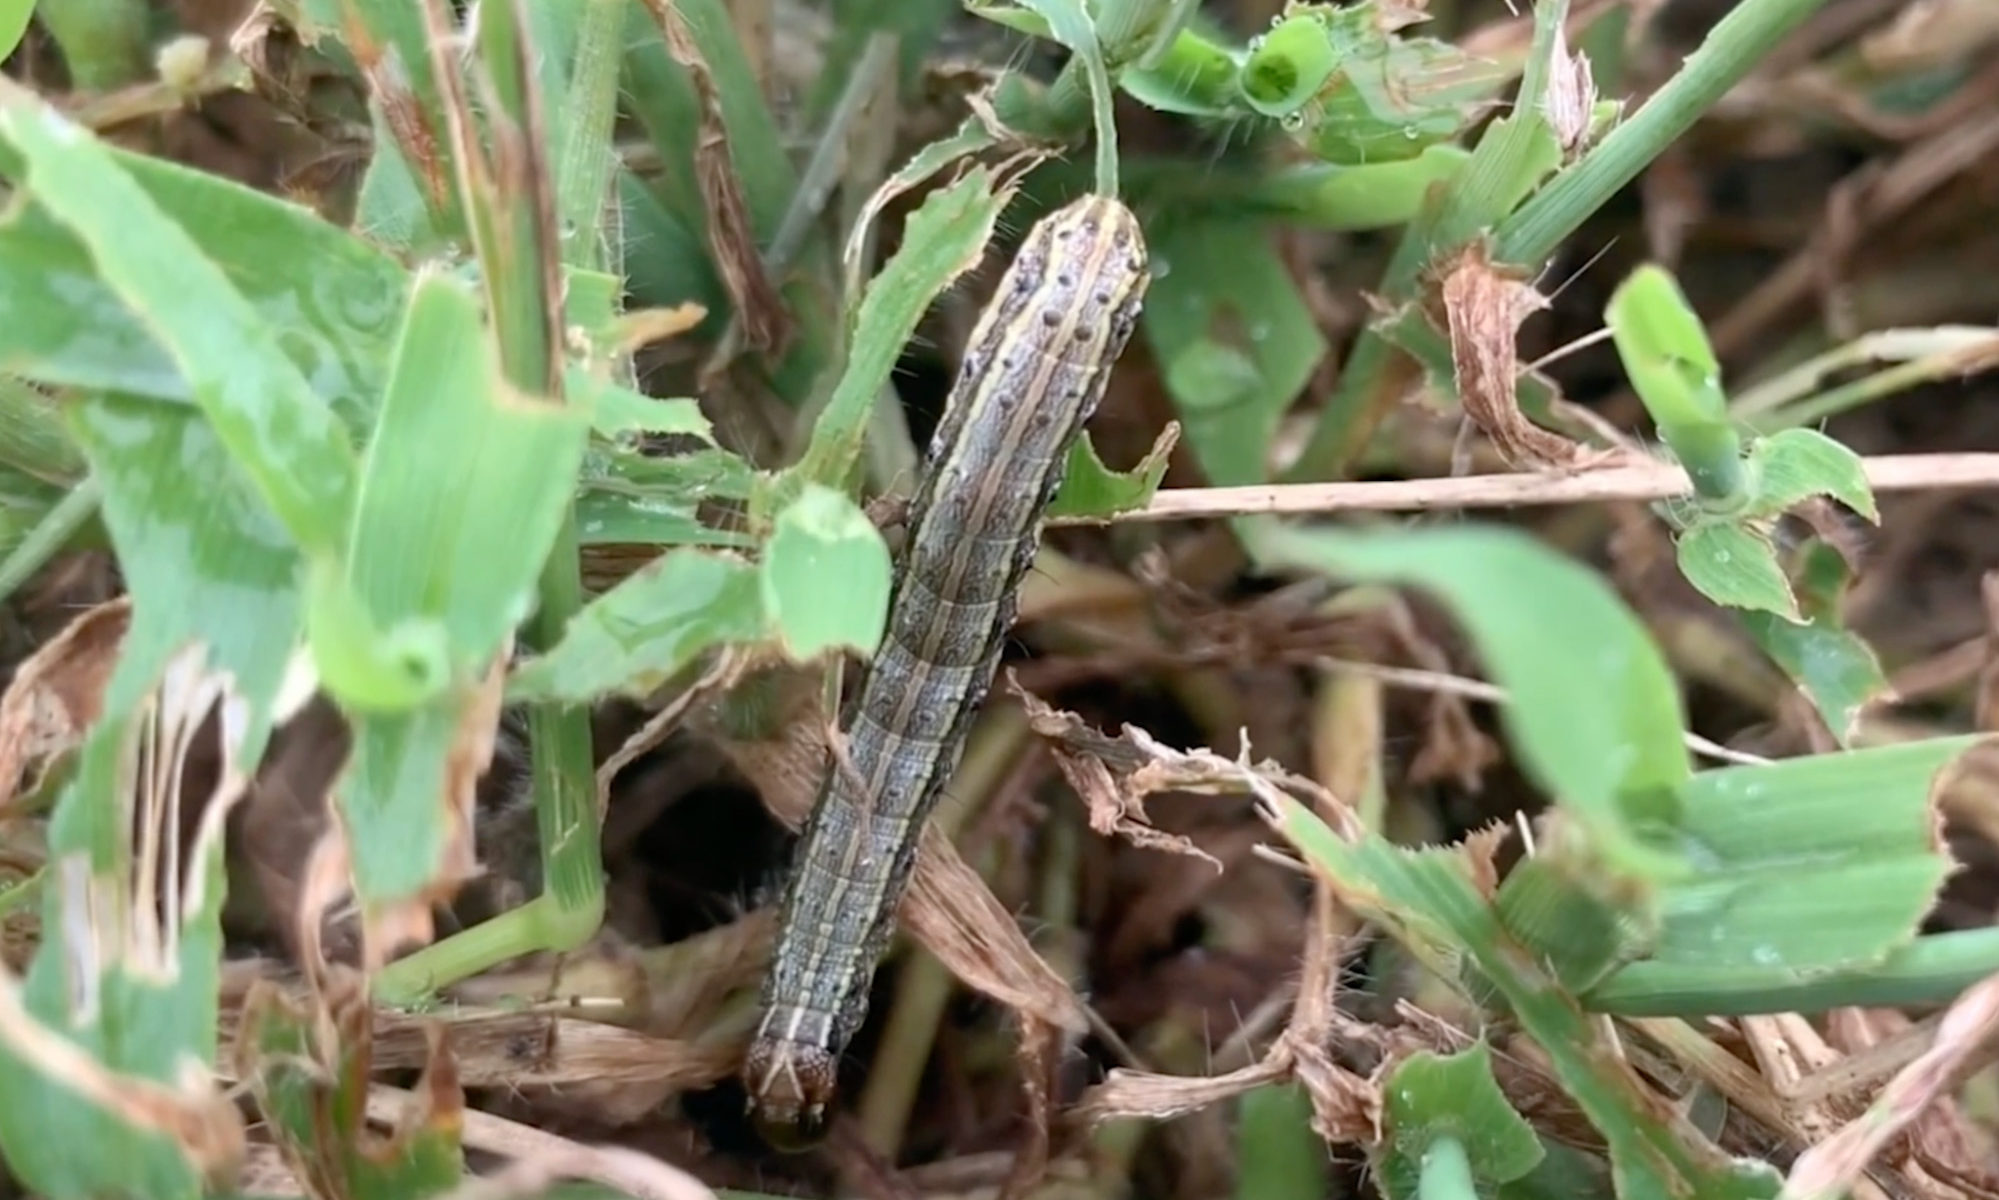 army worm crawls up a blade of grass surrounded by other blades of grass